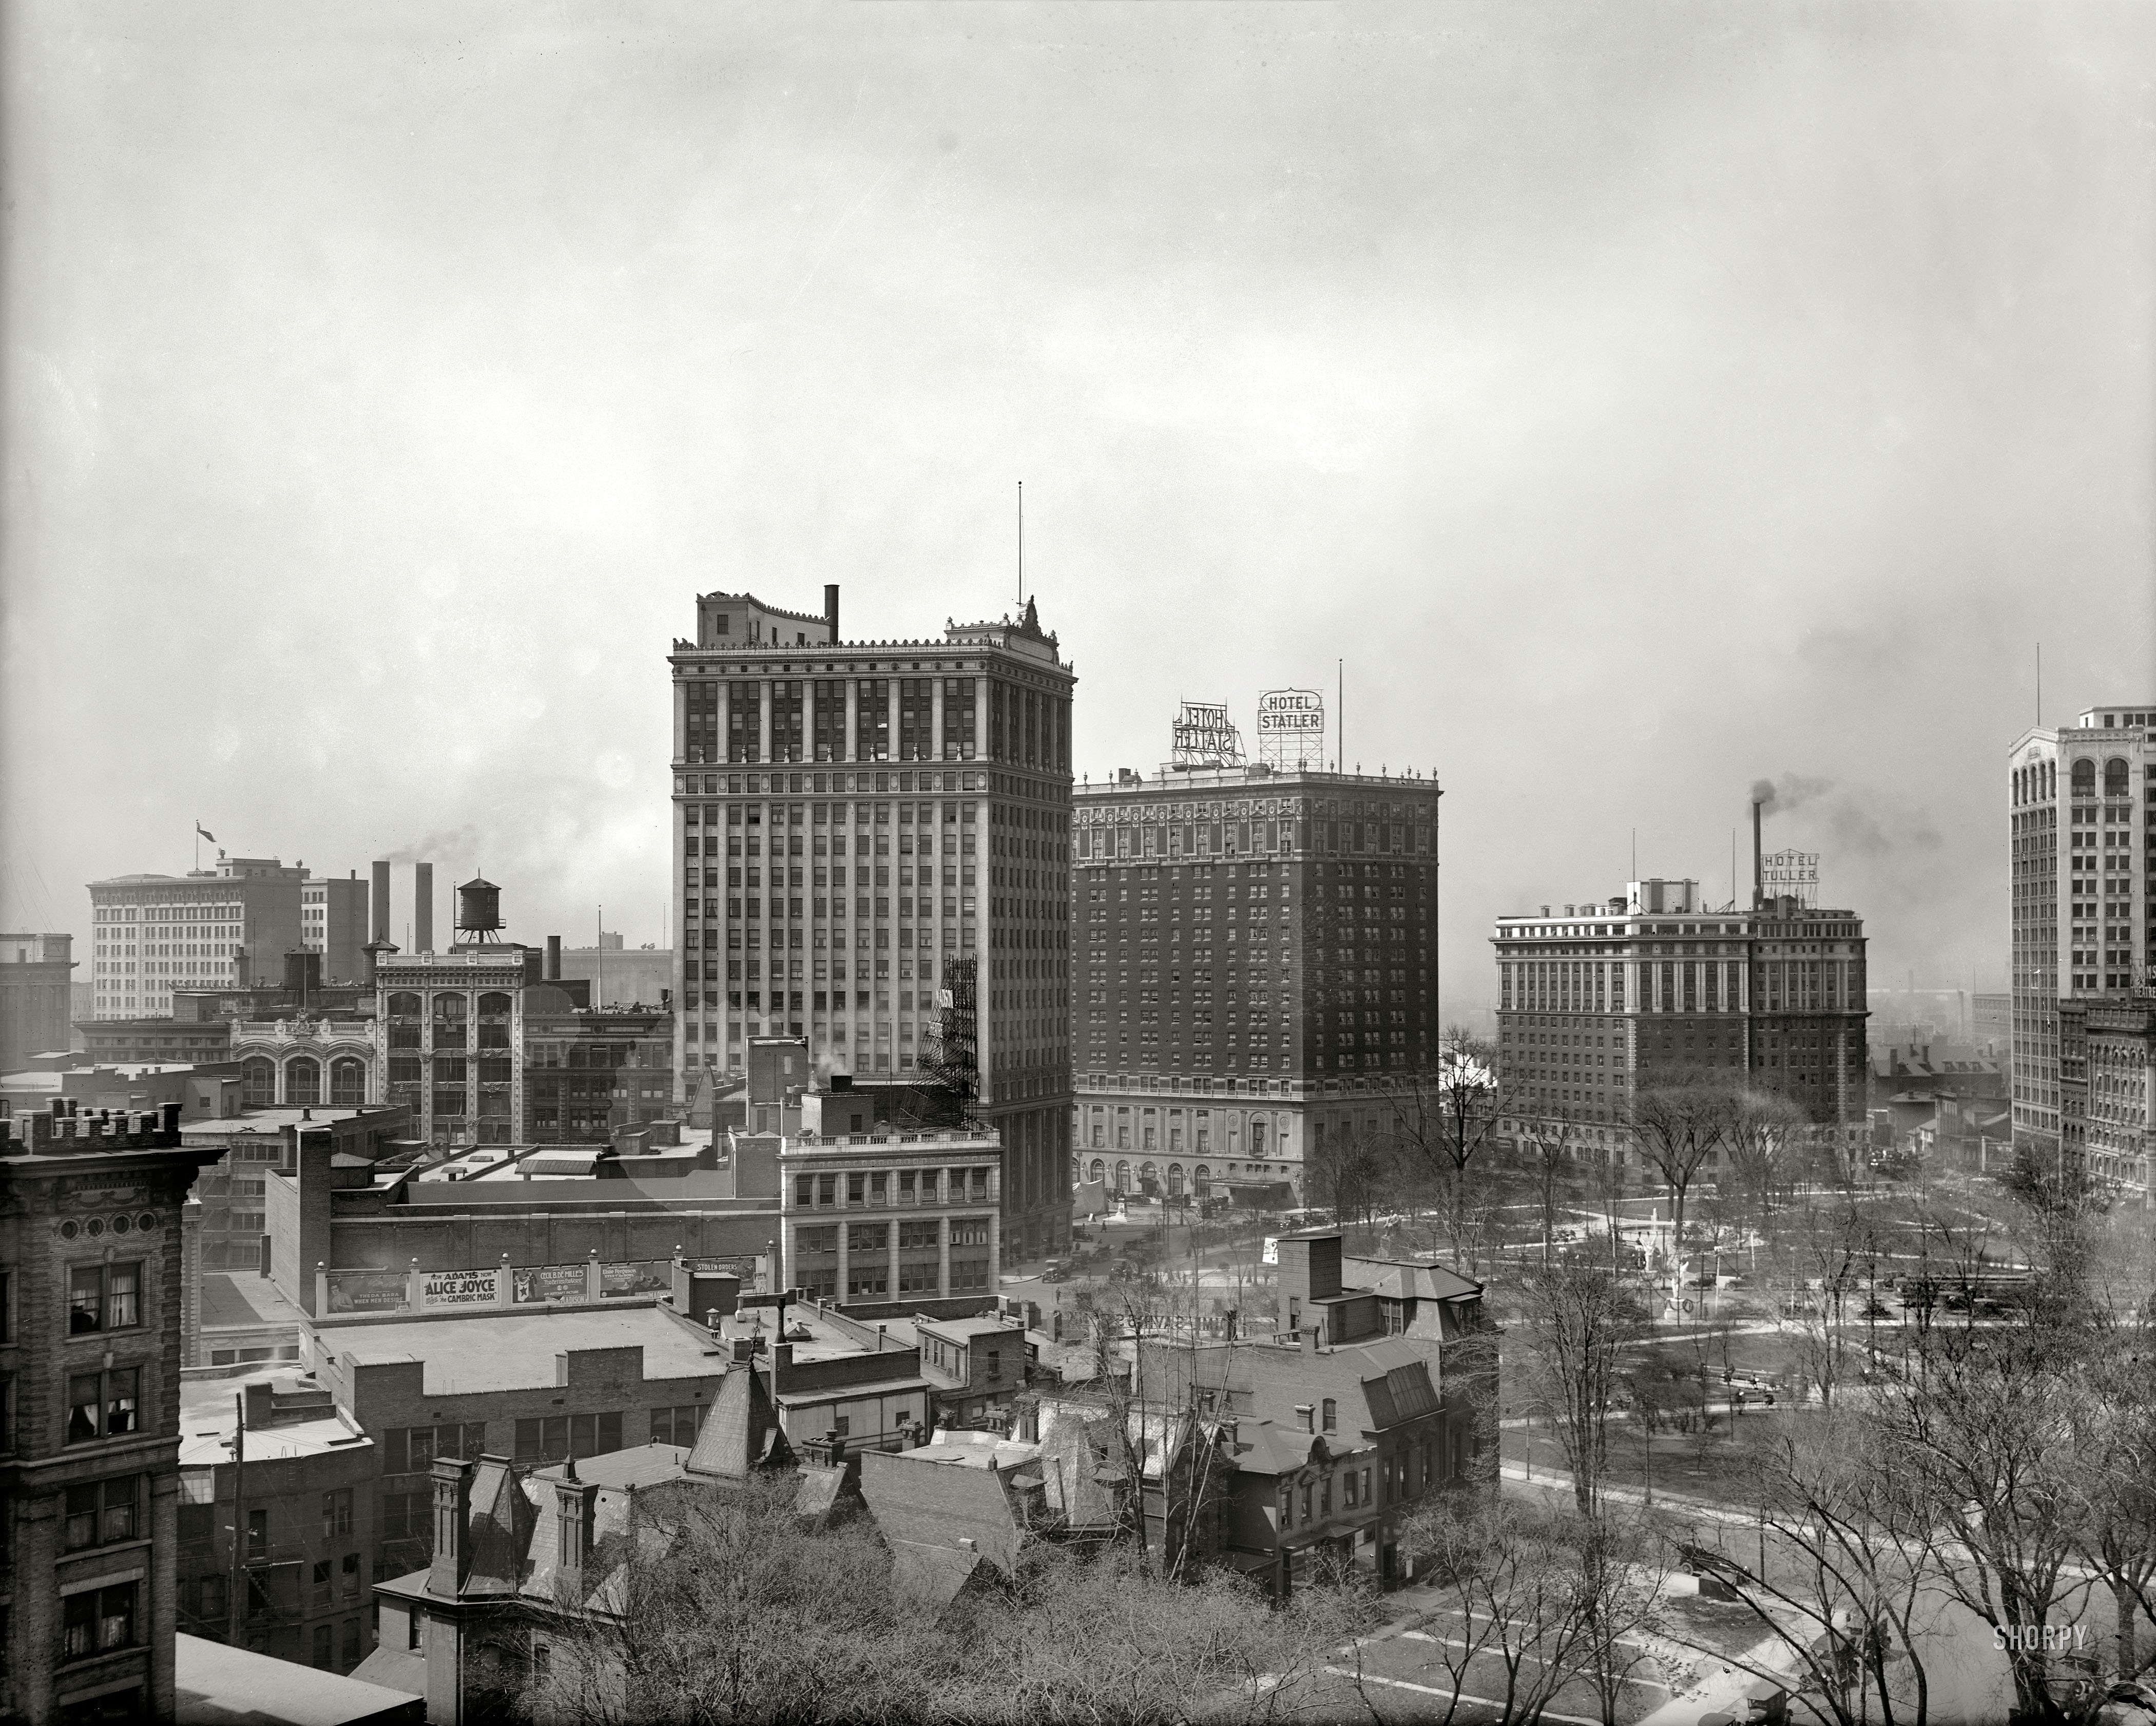 Detroit circa 1919. "Grand Circus Park from Detroit Athletic Club." The Statler and Tuller hotels, and the two Winged Victory statues seen here. Photoplays being advertised include "When Men Desire" starring Theda Bara, Alice Joyce in "The Cambric Mask," Cecil B. DeMille's "For Better, For Worse," Elsie Ferguson in "Eyes of the Soul," and "Stolen Orders."  8x10 glass negative. View full size.